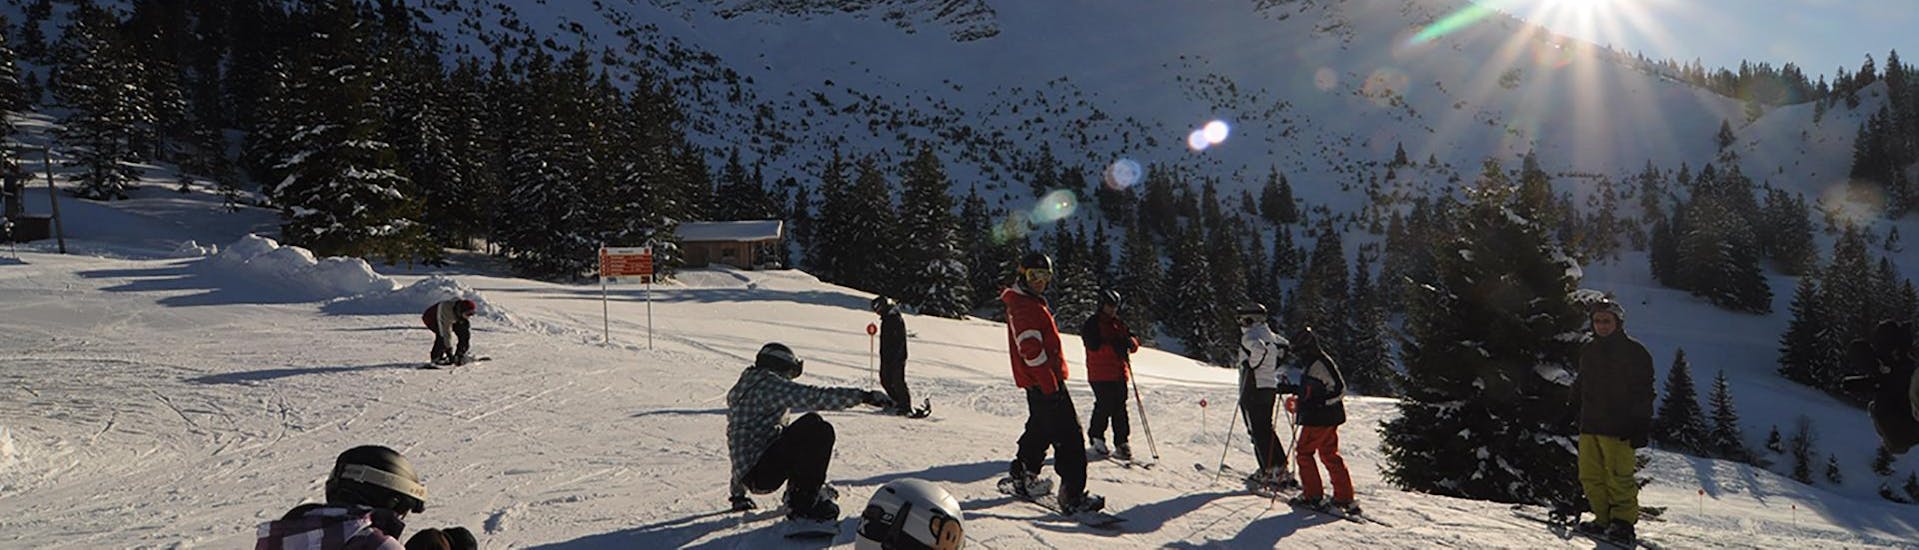 Kids Snowboarding Lessons (7-12 y.) for All Levels with Ski &amp; Snowboard School Ostrachtal - Hero image